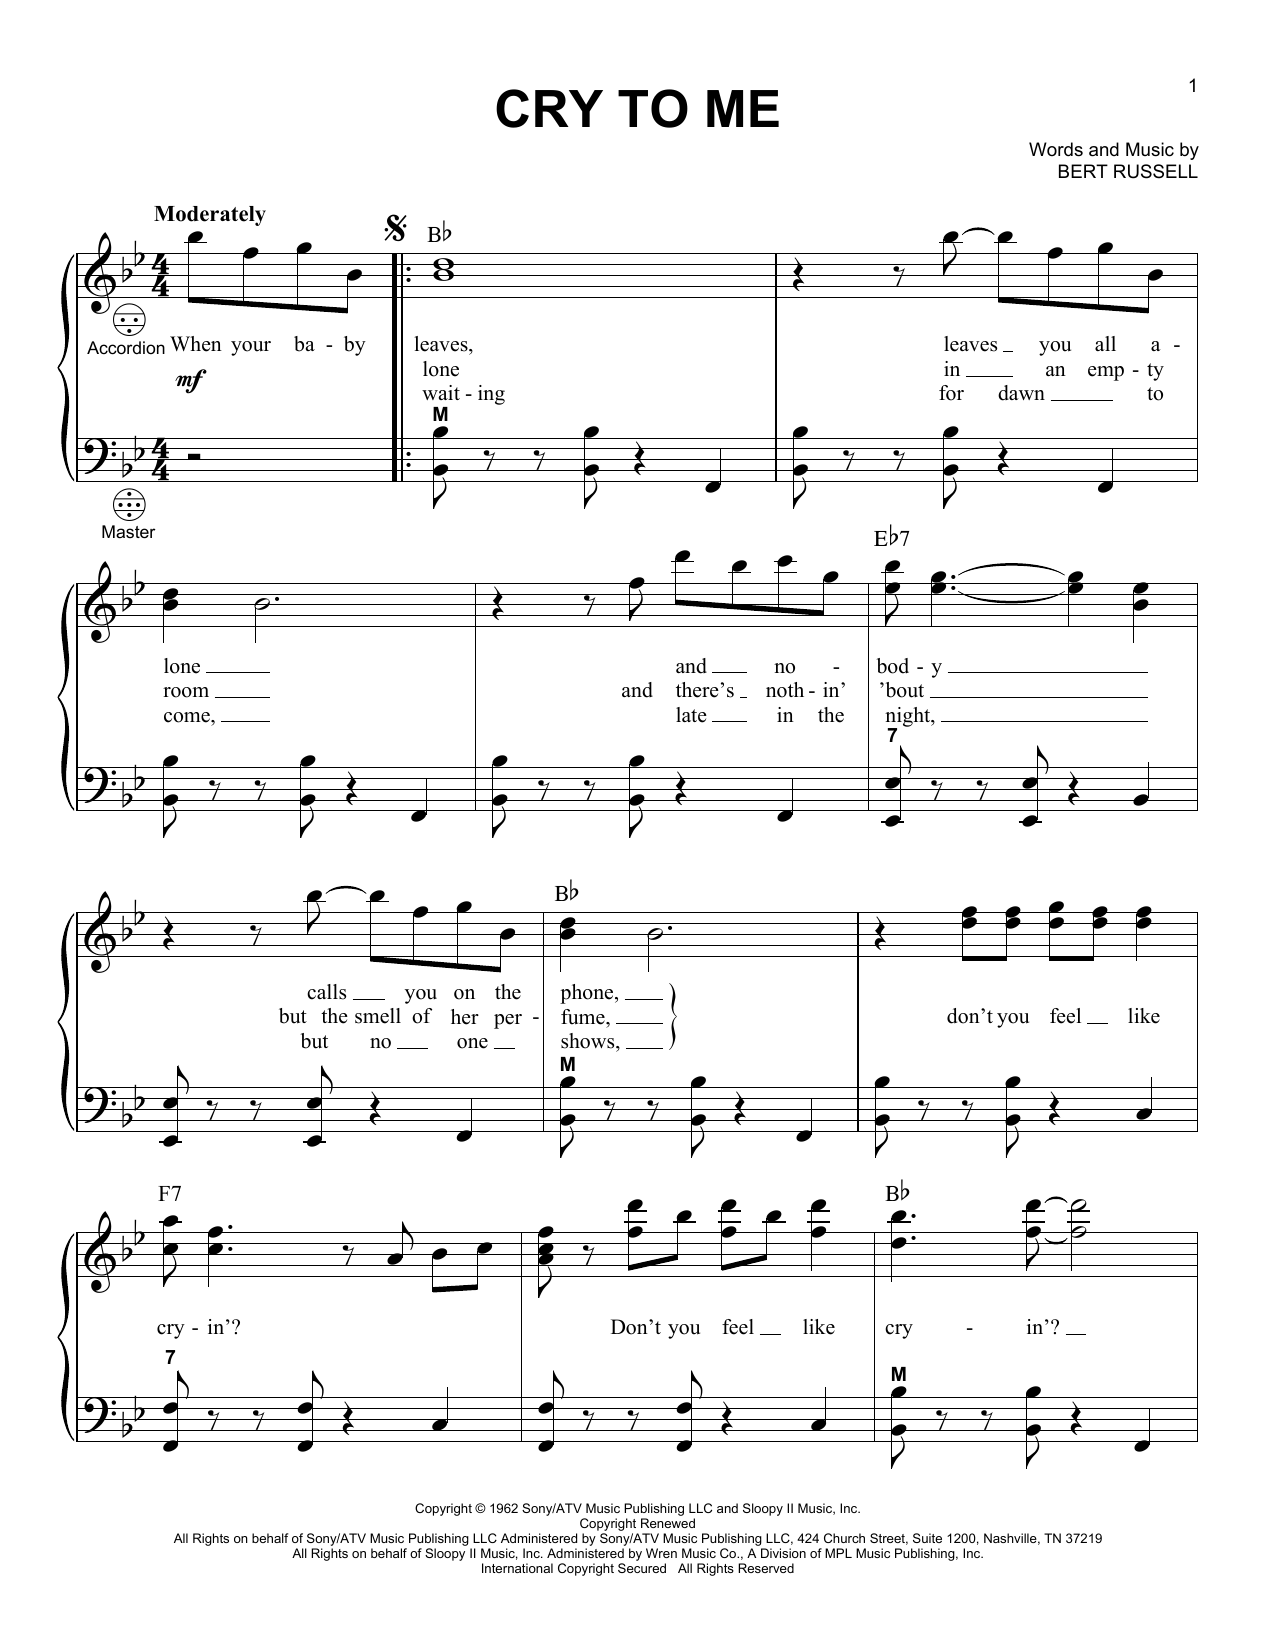 Download Bert Russell Cry To Me Sheet Music